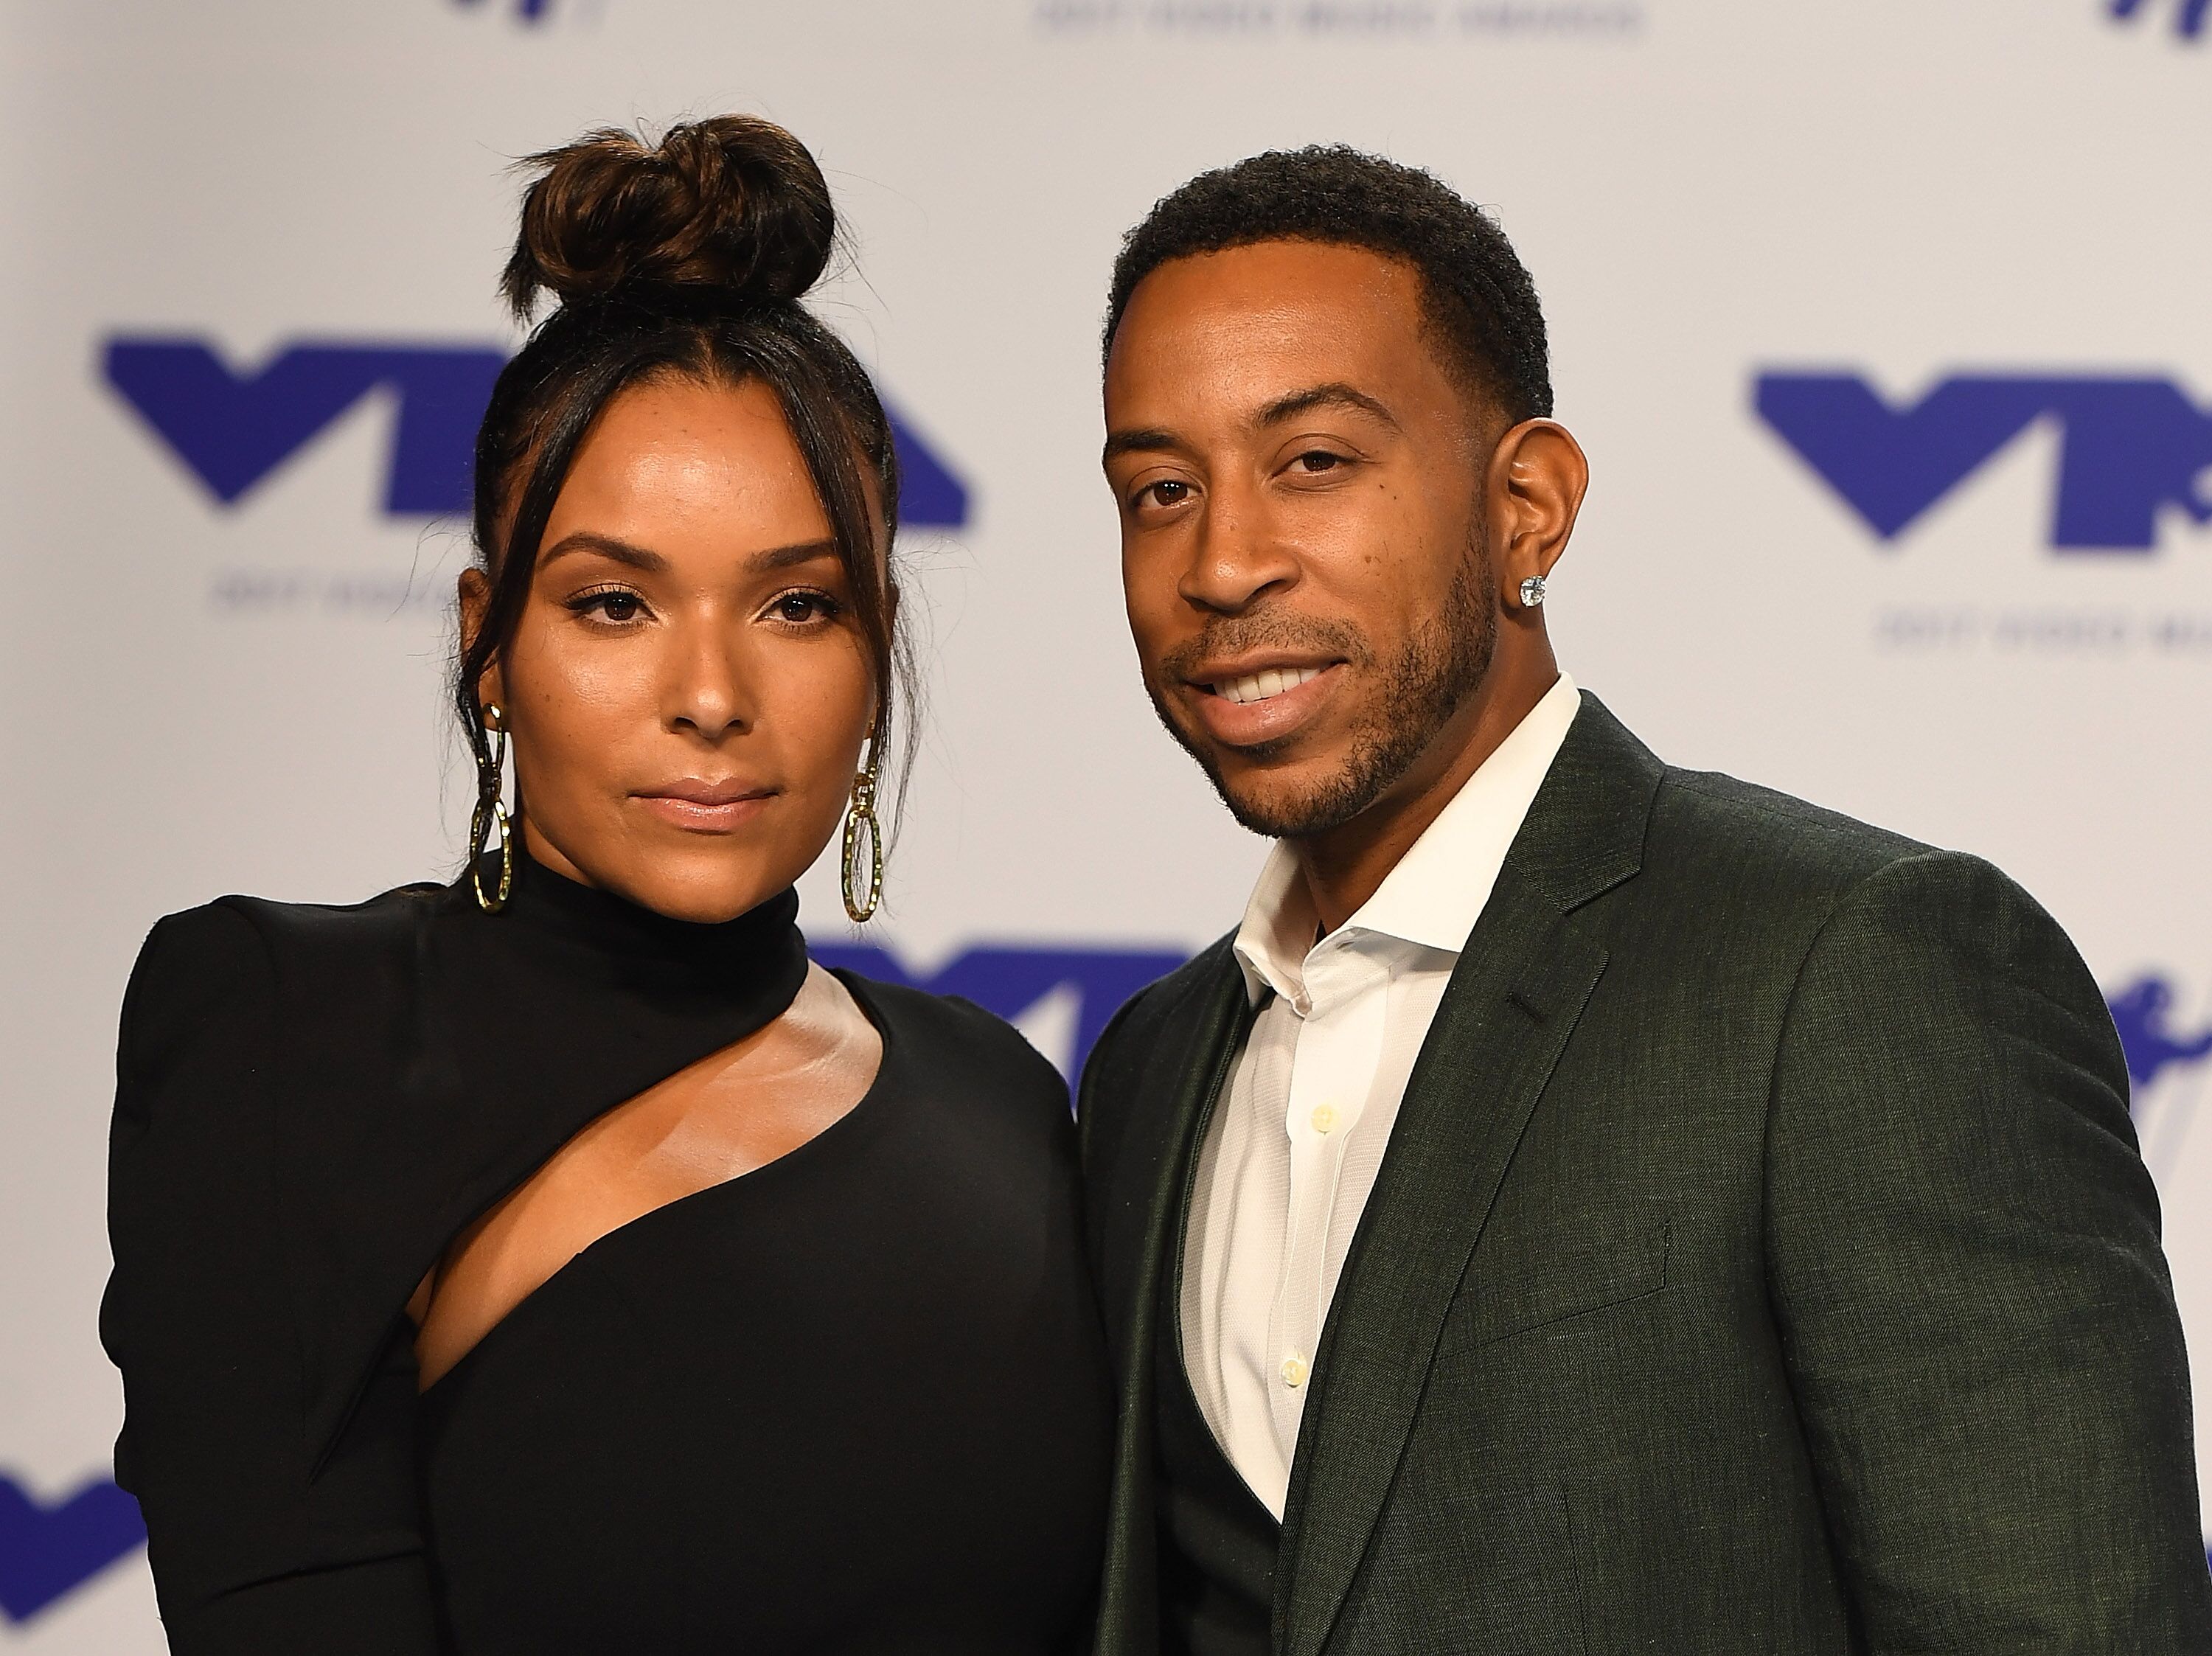 Ludacris and Eudoxie Mbouguiengue at the 2017 MTV Video Music Awards at The Forum on August 27, 2017 | Photo: Getty Images